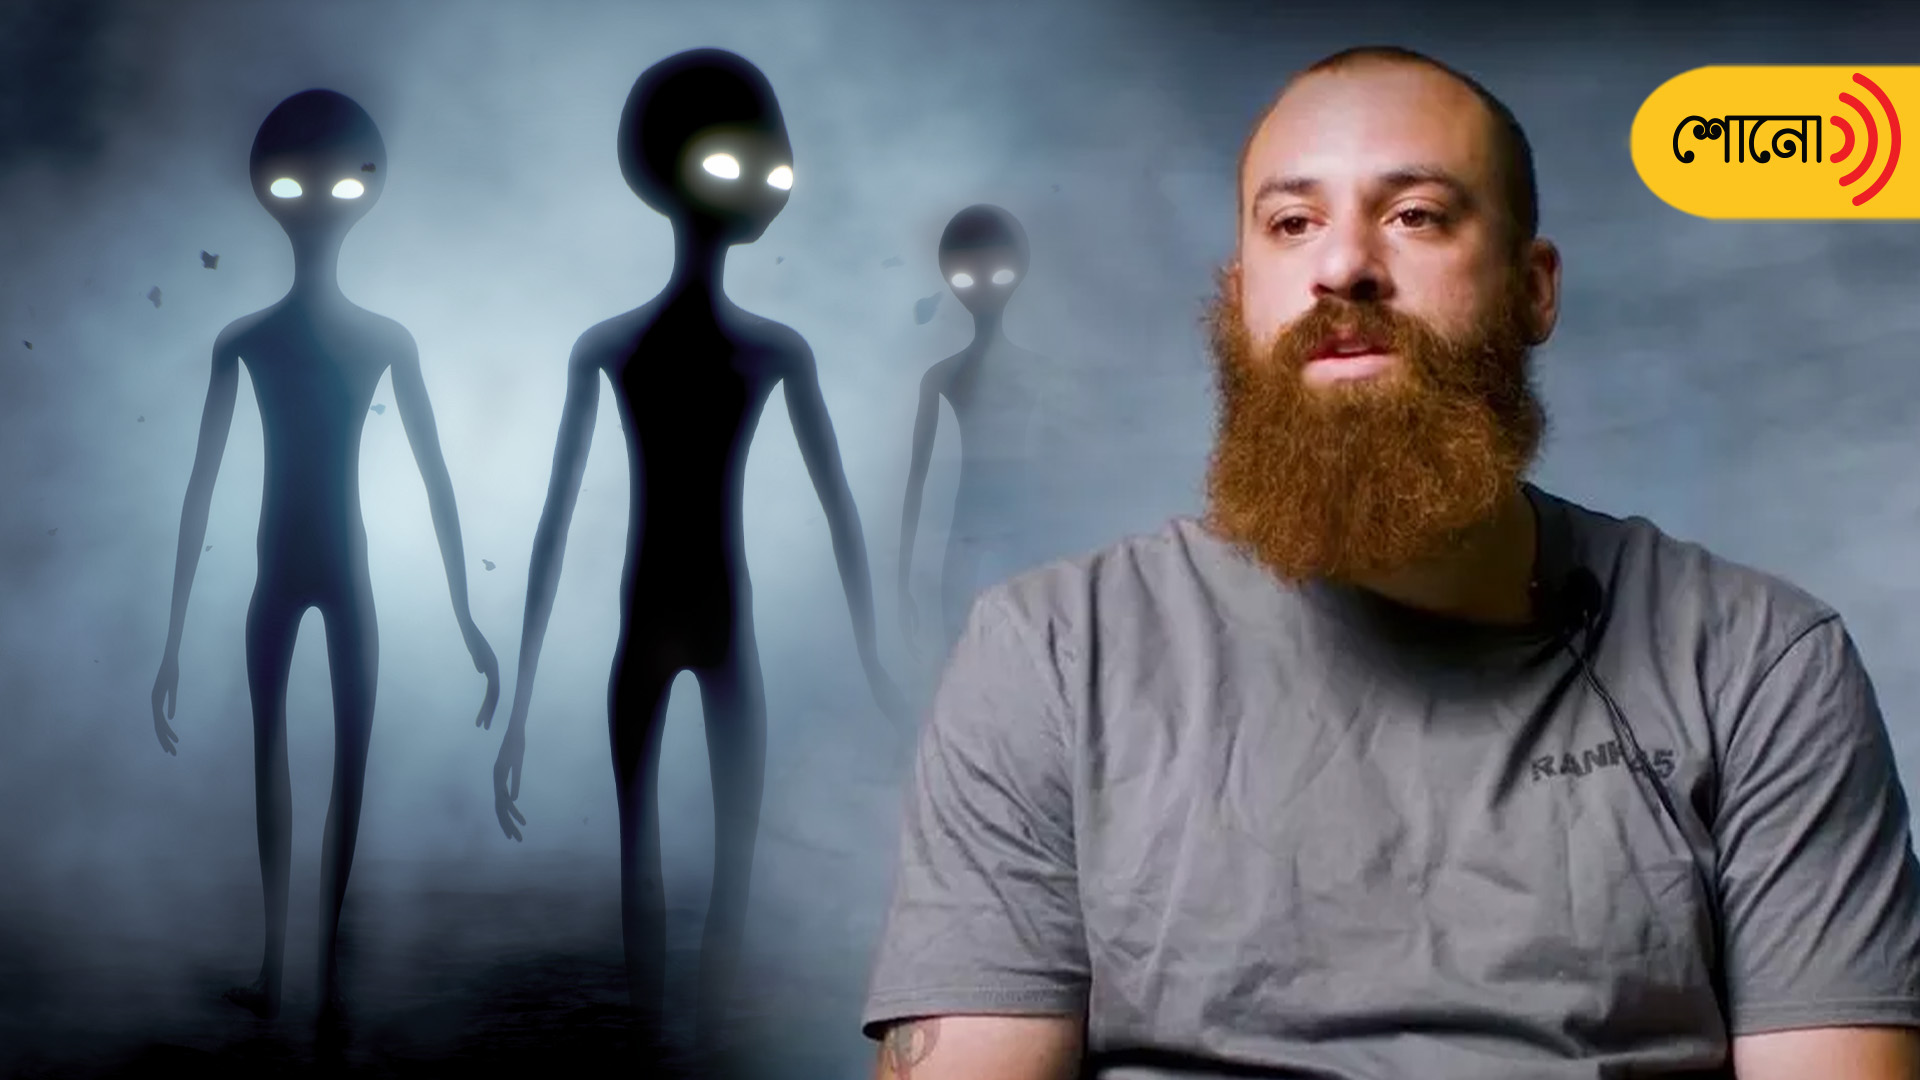 Aliens took his sperm for experiments, claims this man